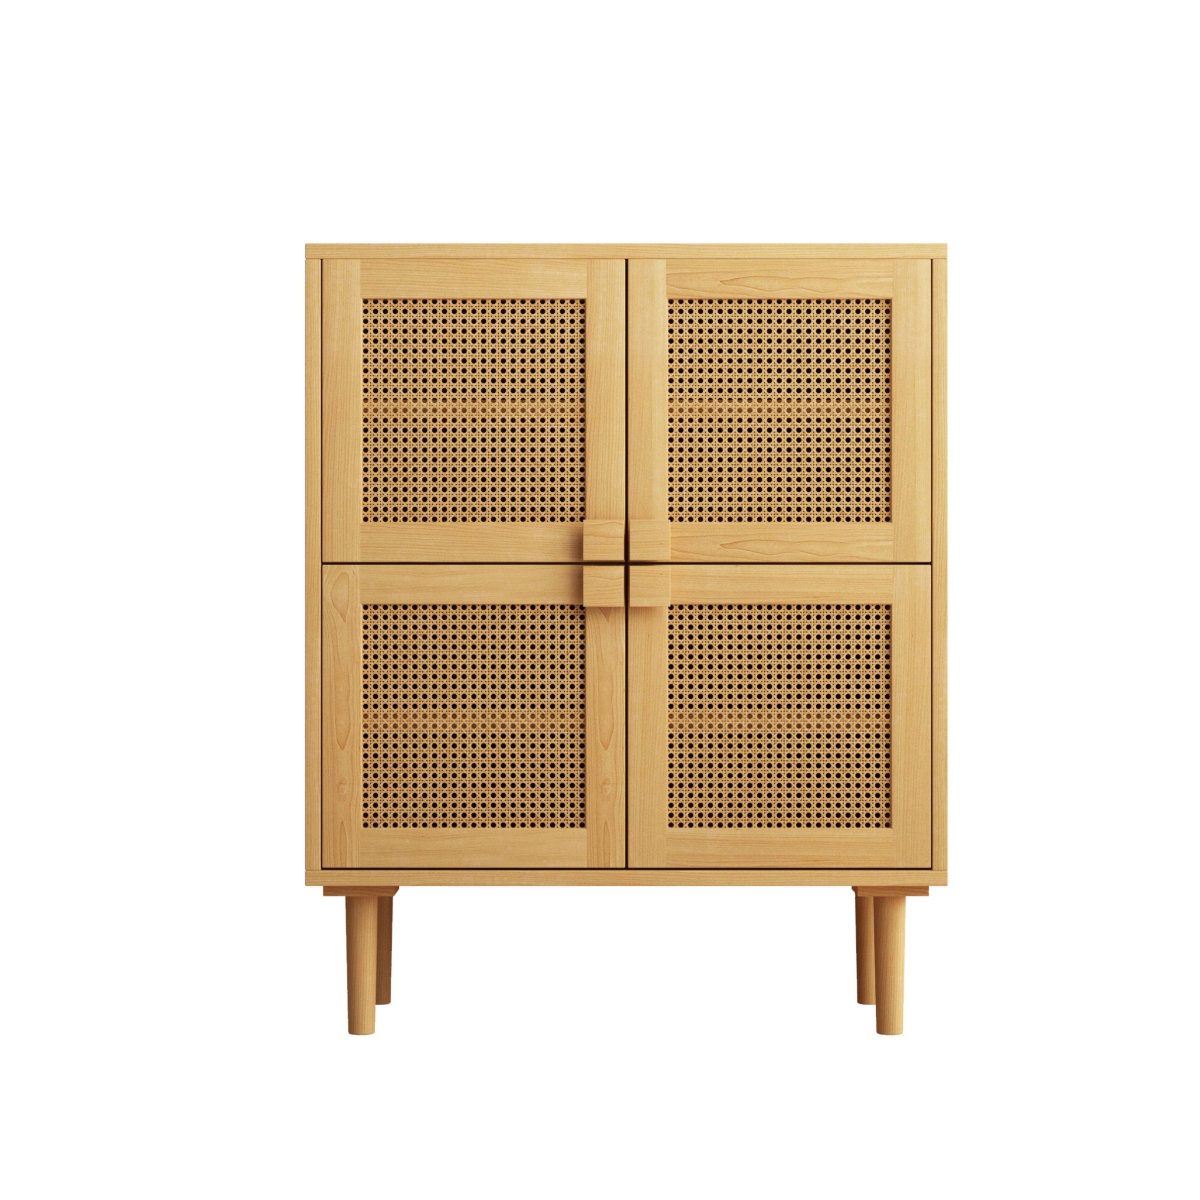 4-Doors Rattan Mesh Storage Cabinet, Shoe Cabinet With Eight Storage Spaces, For Entryway, Living Room, Hallway (Natural) - Natural